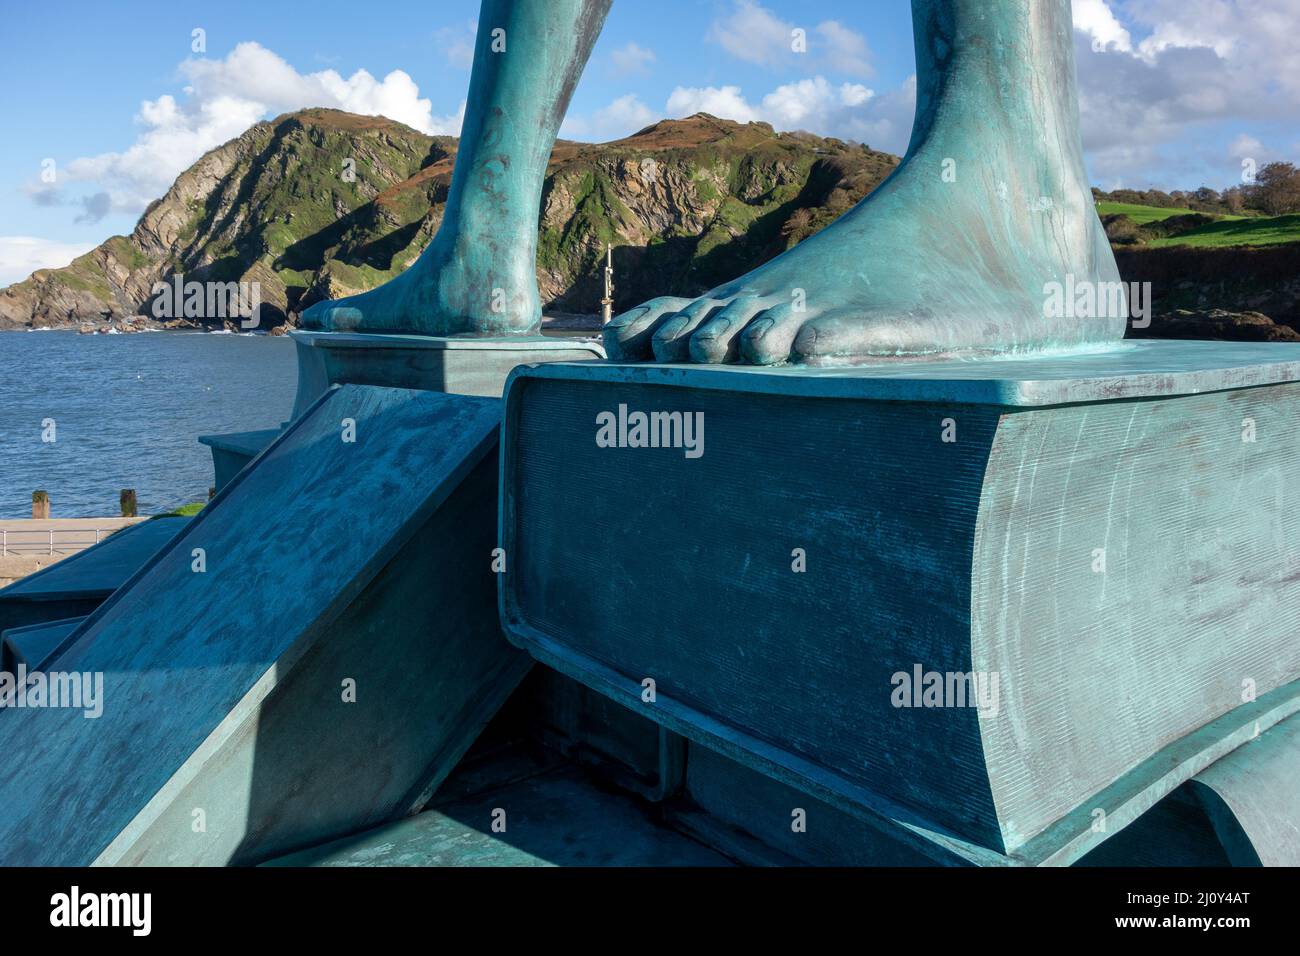 ILFRACOMBE, DEVON, UK - OCTOBER 19 : Partial detailed view of Damien Hirst's Verity at Ilfracombe harbour in Devon on October 19 Stock Photo